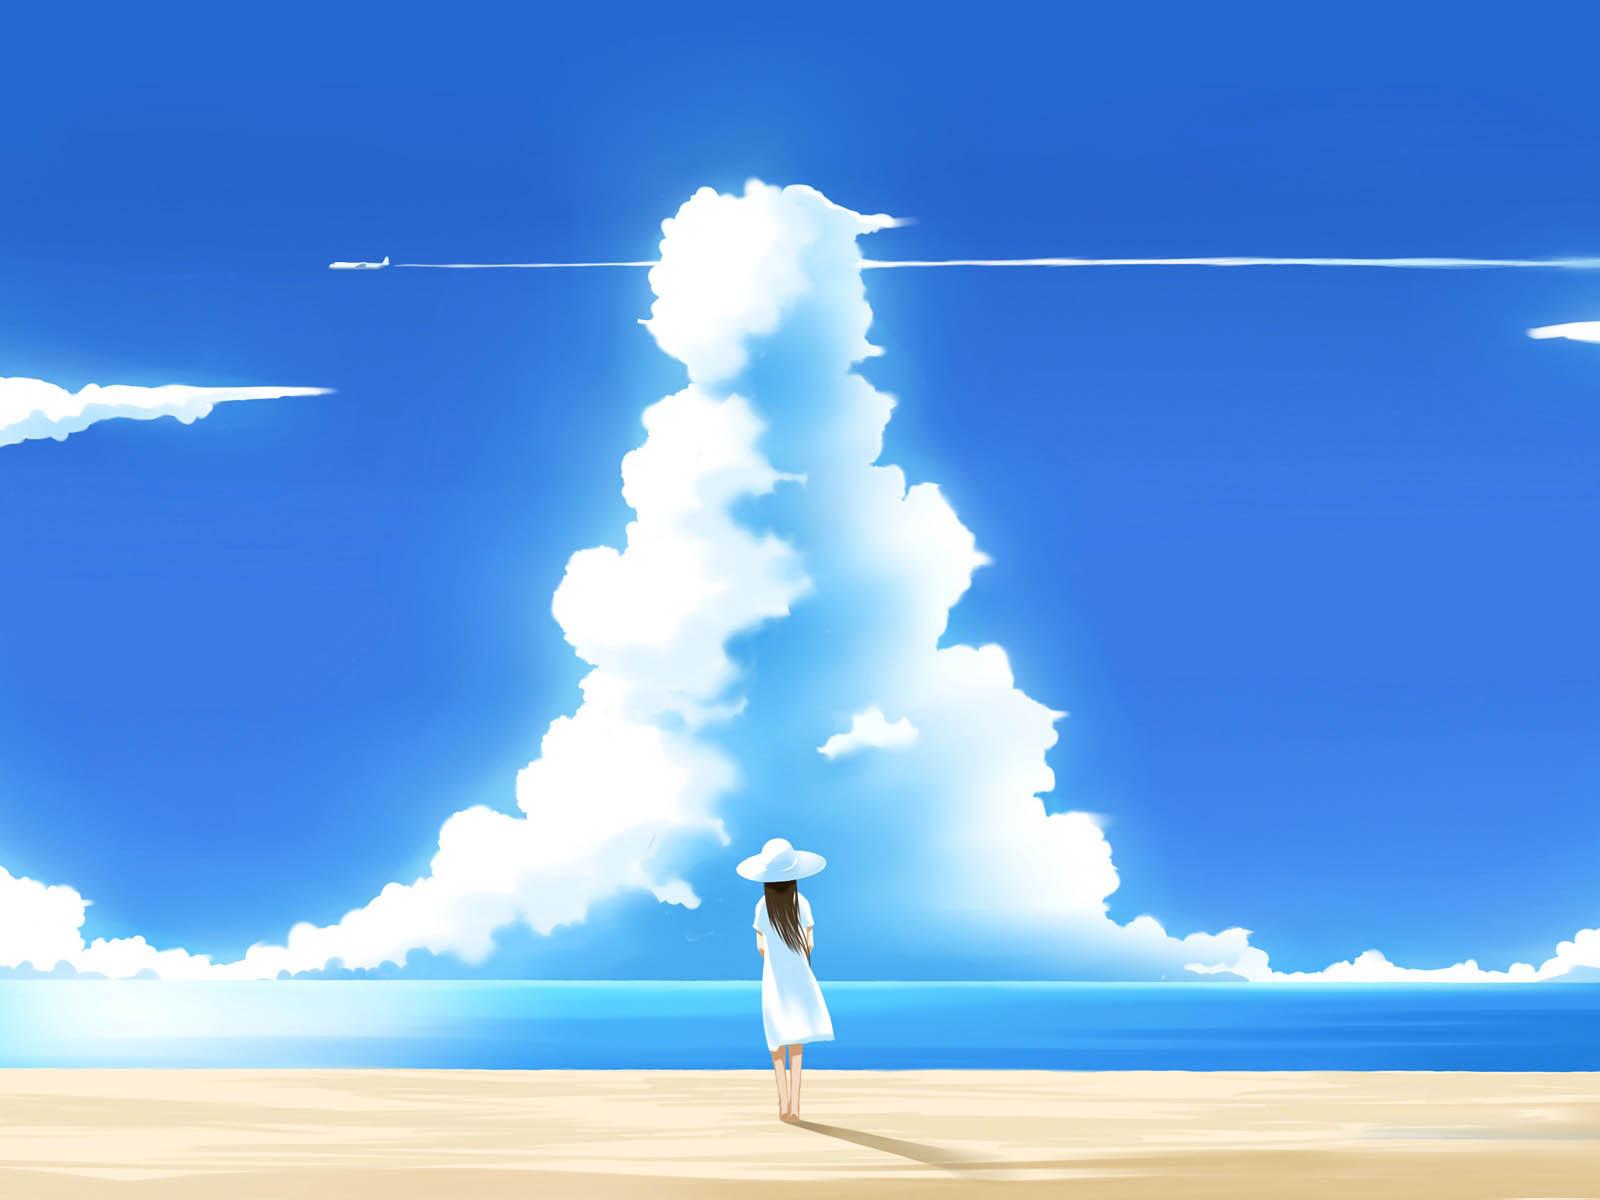 Anime Summer PC Wallpapers - Wallpaper Cave